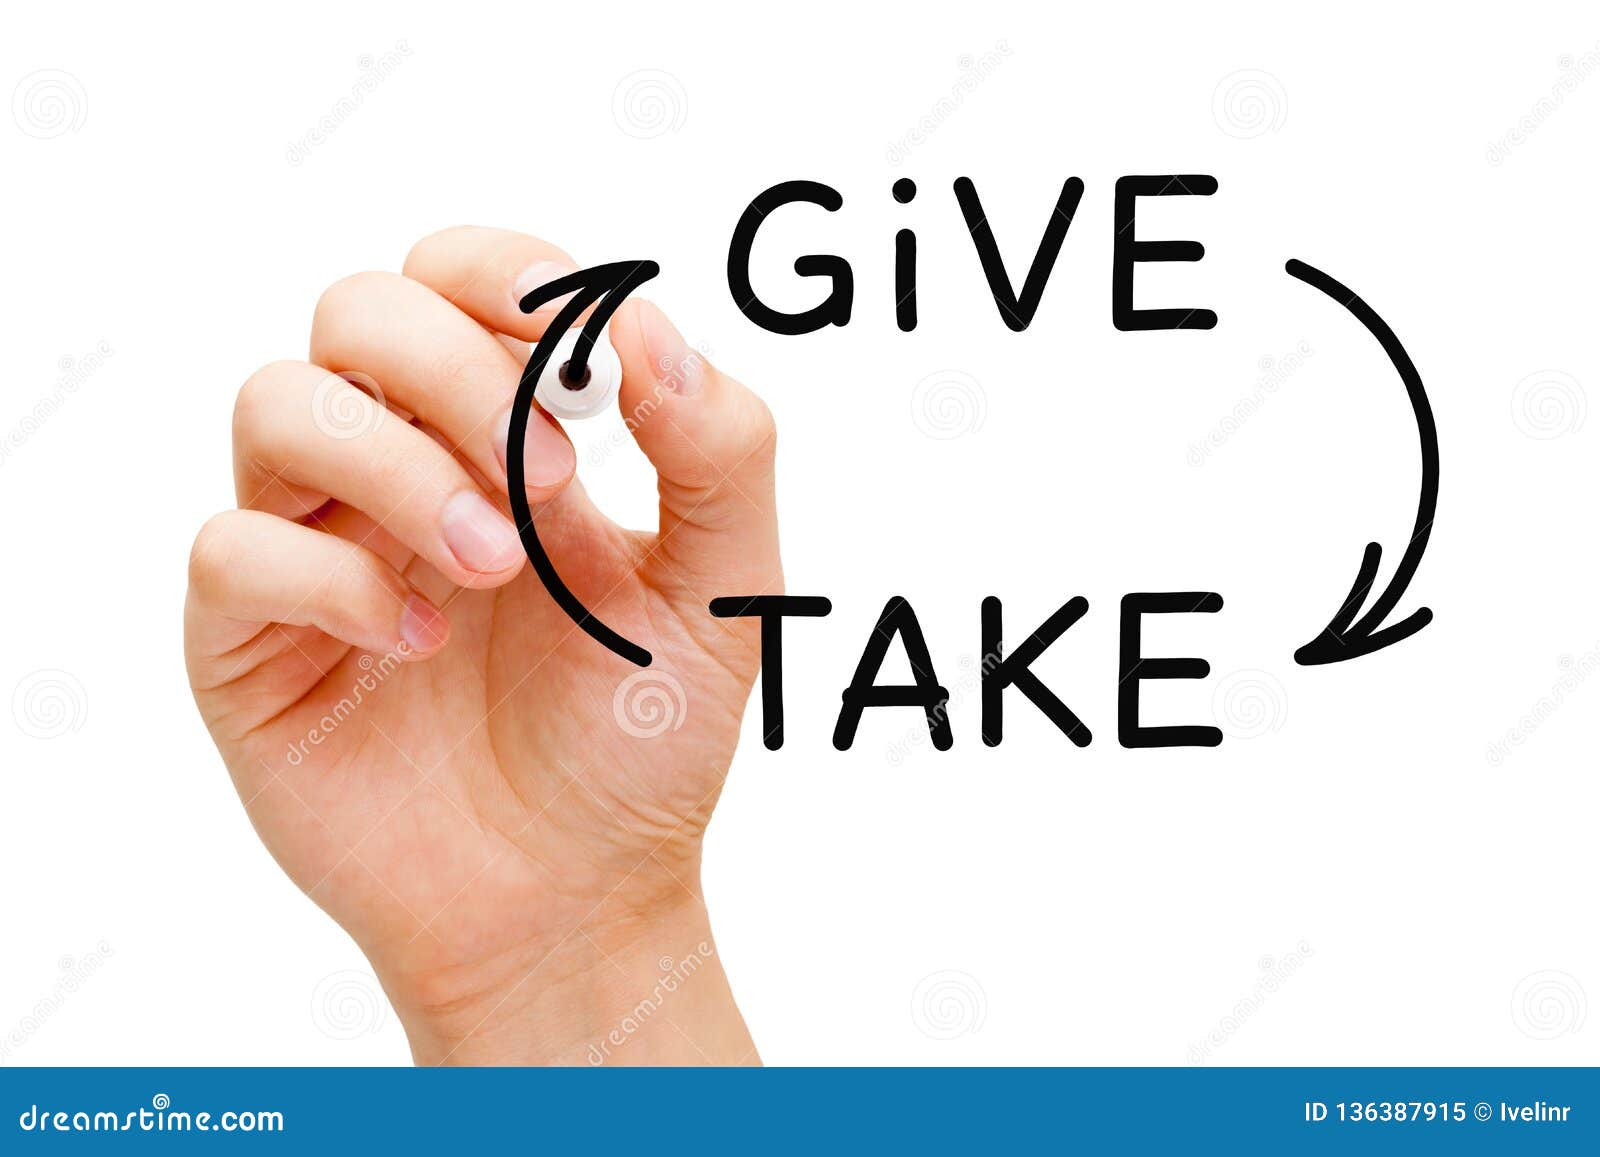 give and take compromise or charity concept